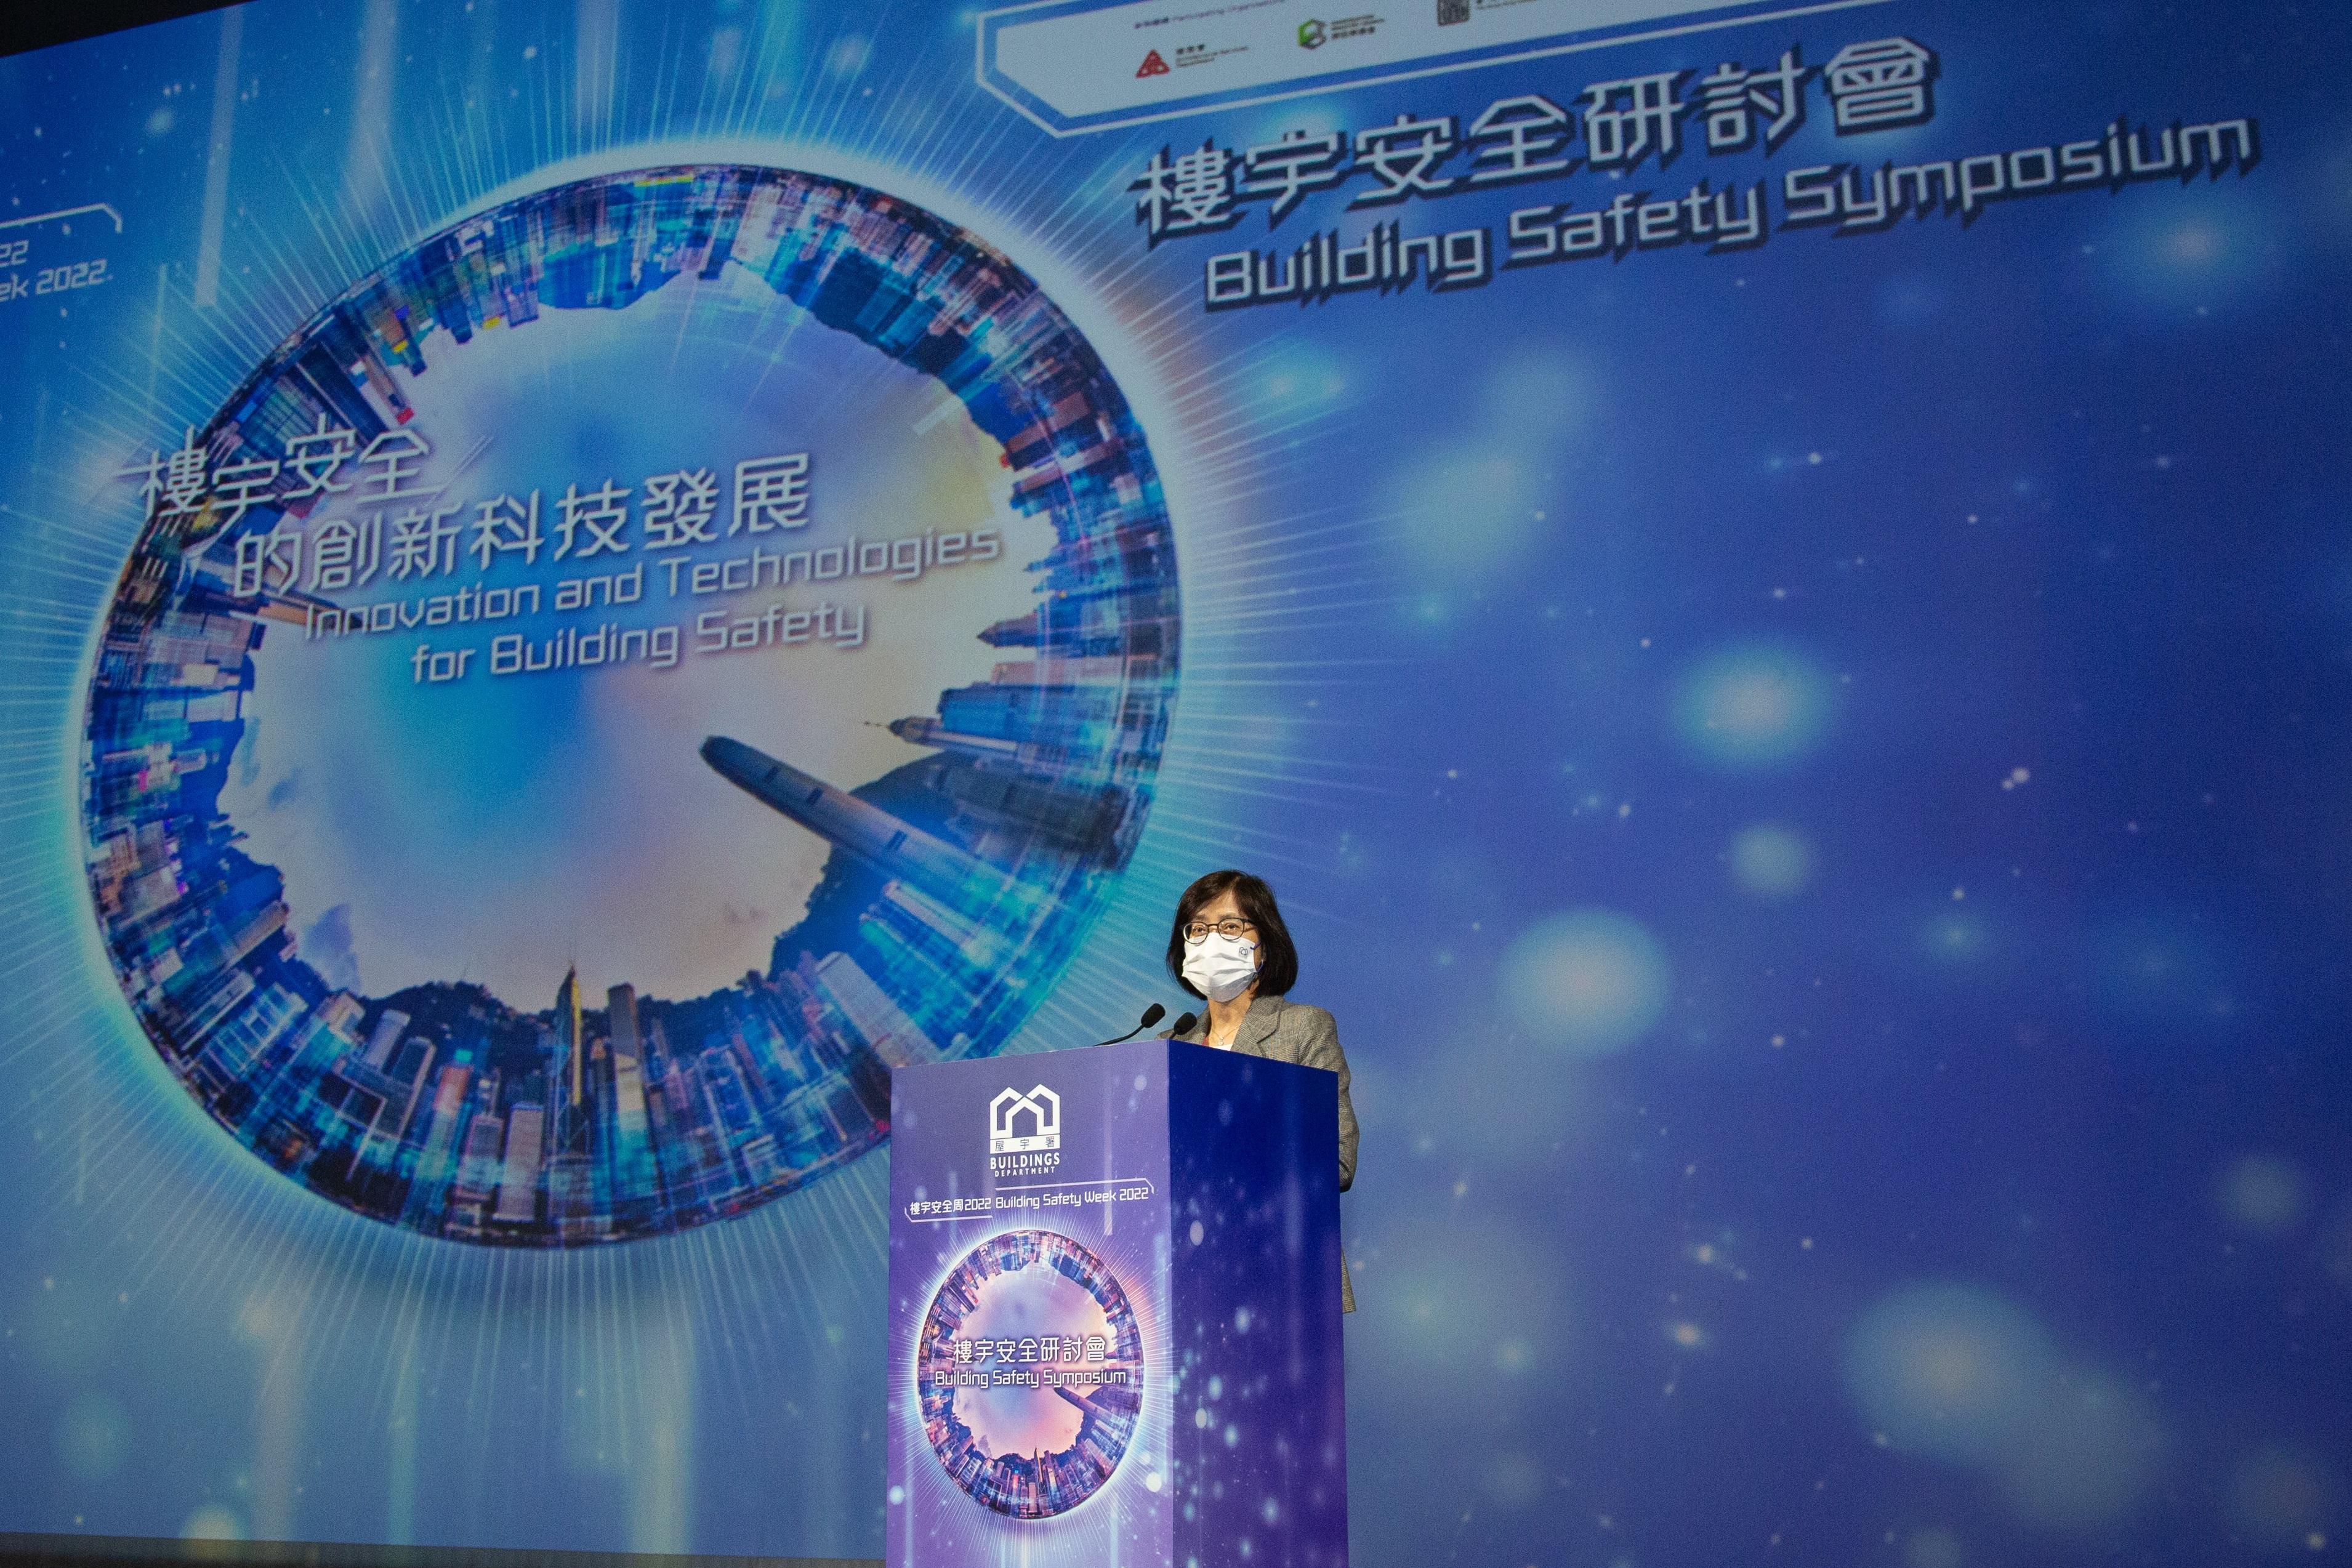 The Buildings Department held the closing event of Building Safety Week 2022, the Building Safety Symposium, at the Xiqu Centre today (October 28). Building professionals, members of the building management sector, government officials and academics were invited to share experiences and exchange views on the topic of "Innovation and Technologies for Building Safety". Photo shows the Director of Buildings, Ms Clarice Yu, giving closing remarks at the symposium.